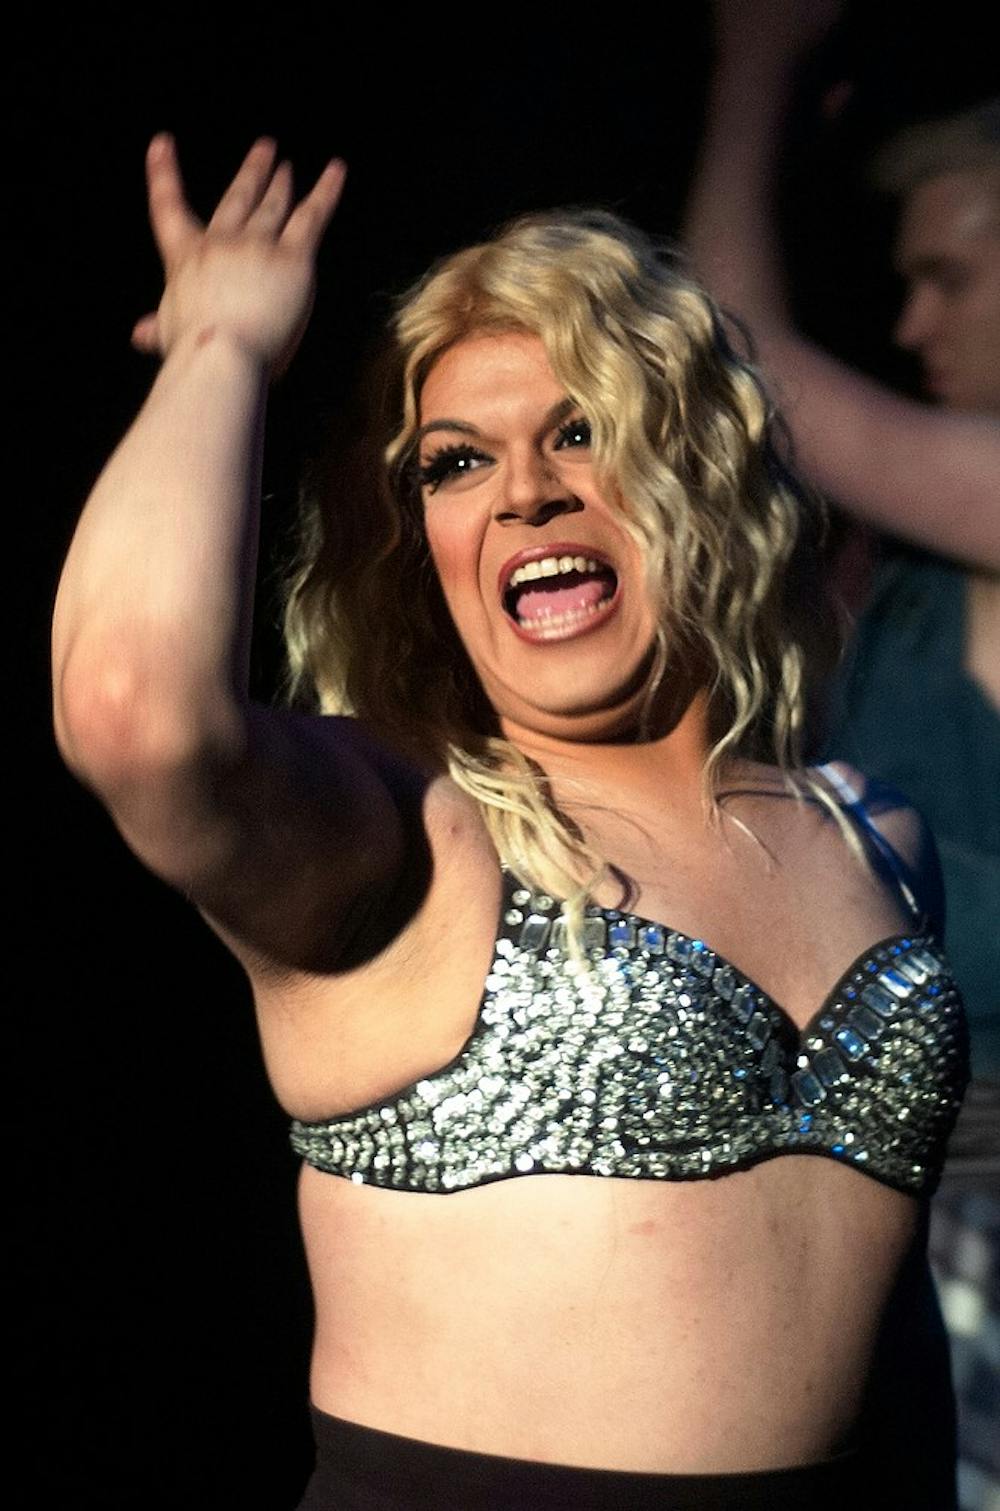 <p>Drag queen Maria Mirelez beams as she sings along to Britney Spears' "Work Bitch" at Spiral Video & Dance Bar March 30. Mirelez is a Britney Spears impersonator and had three backup dancers for the song. Emily Jenks/The State News.</p>